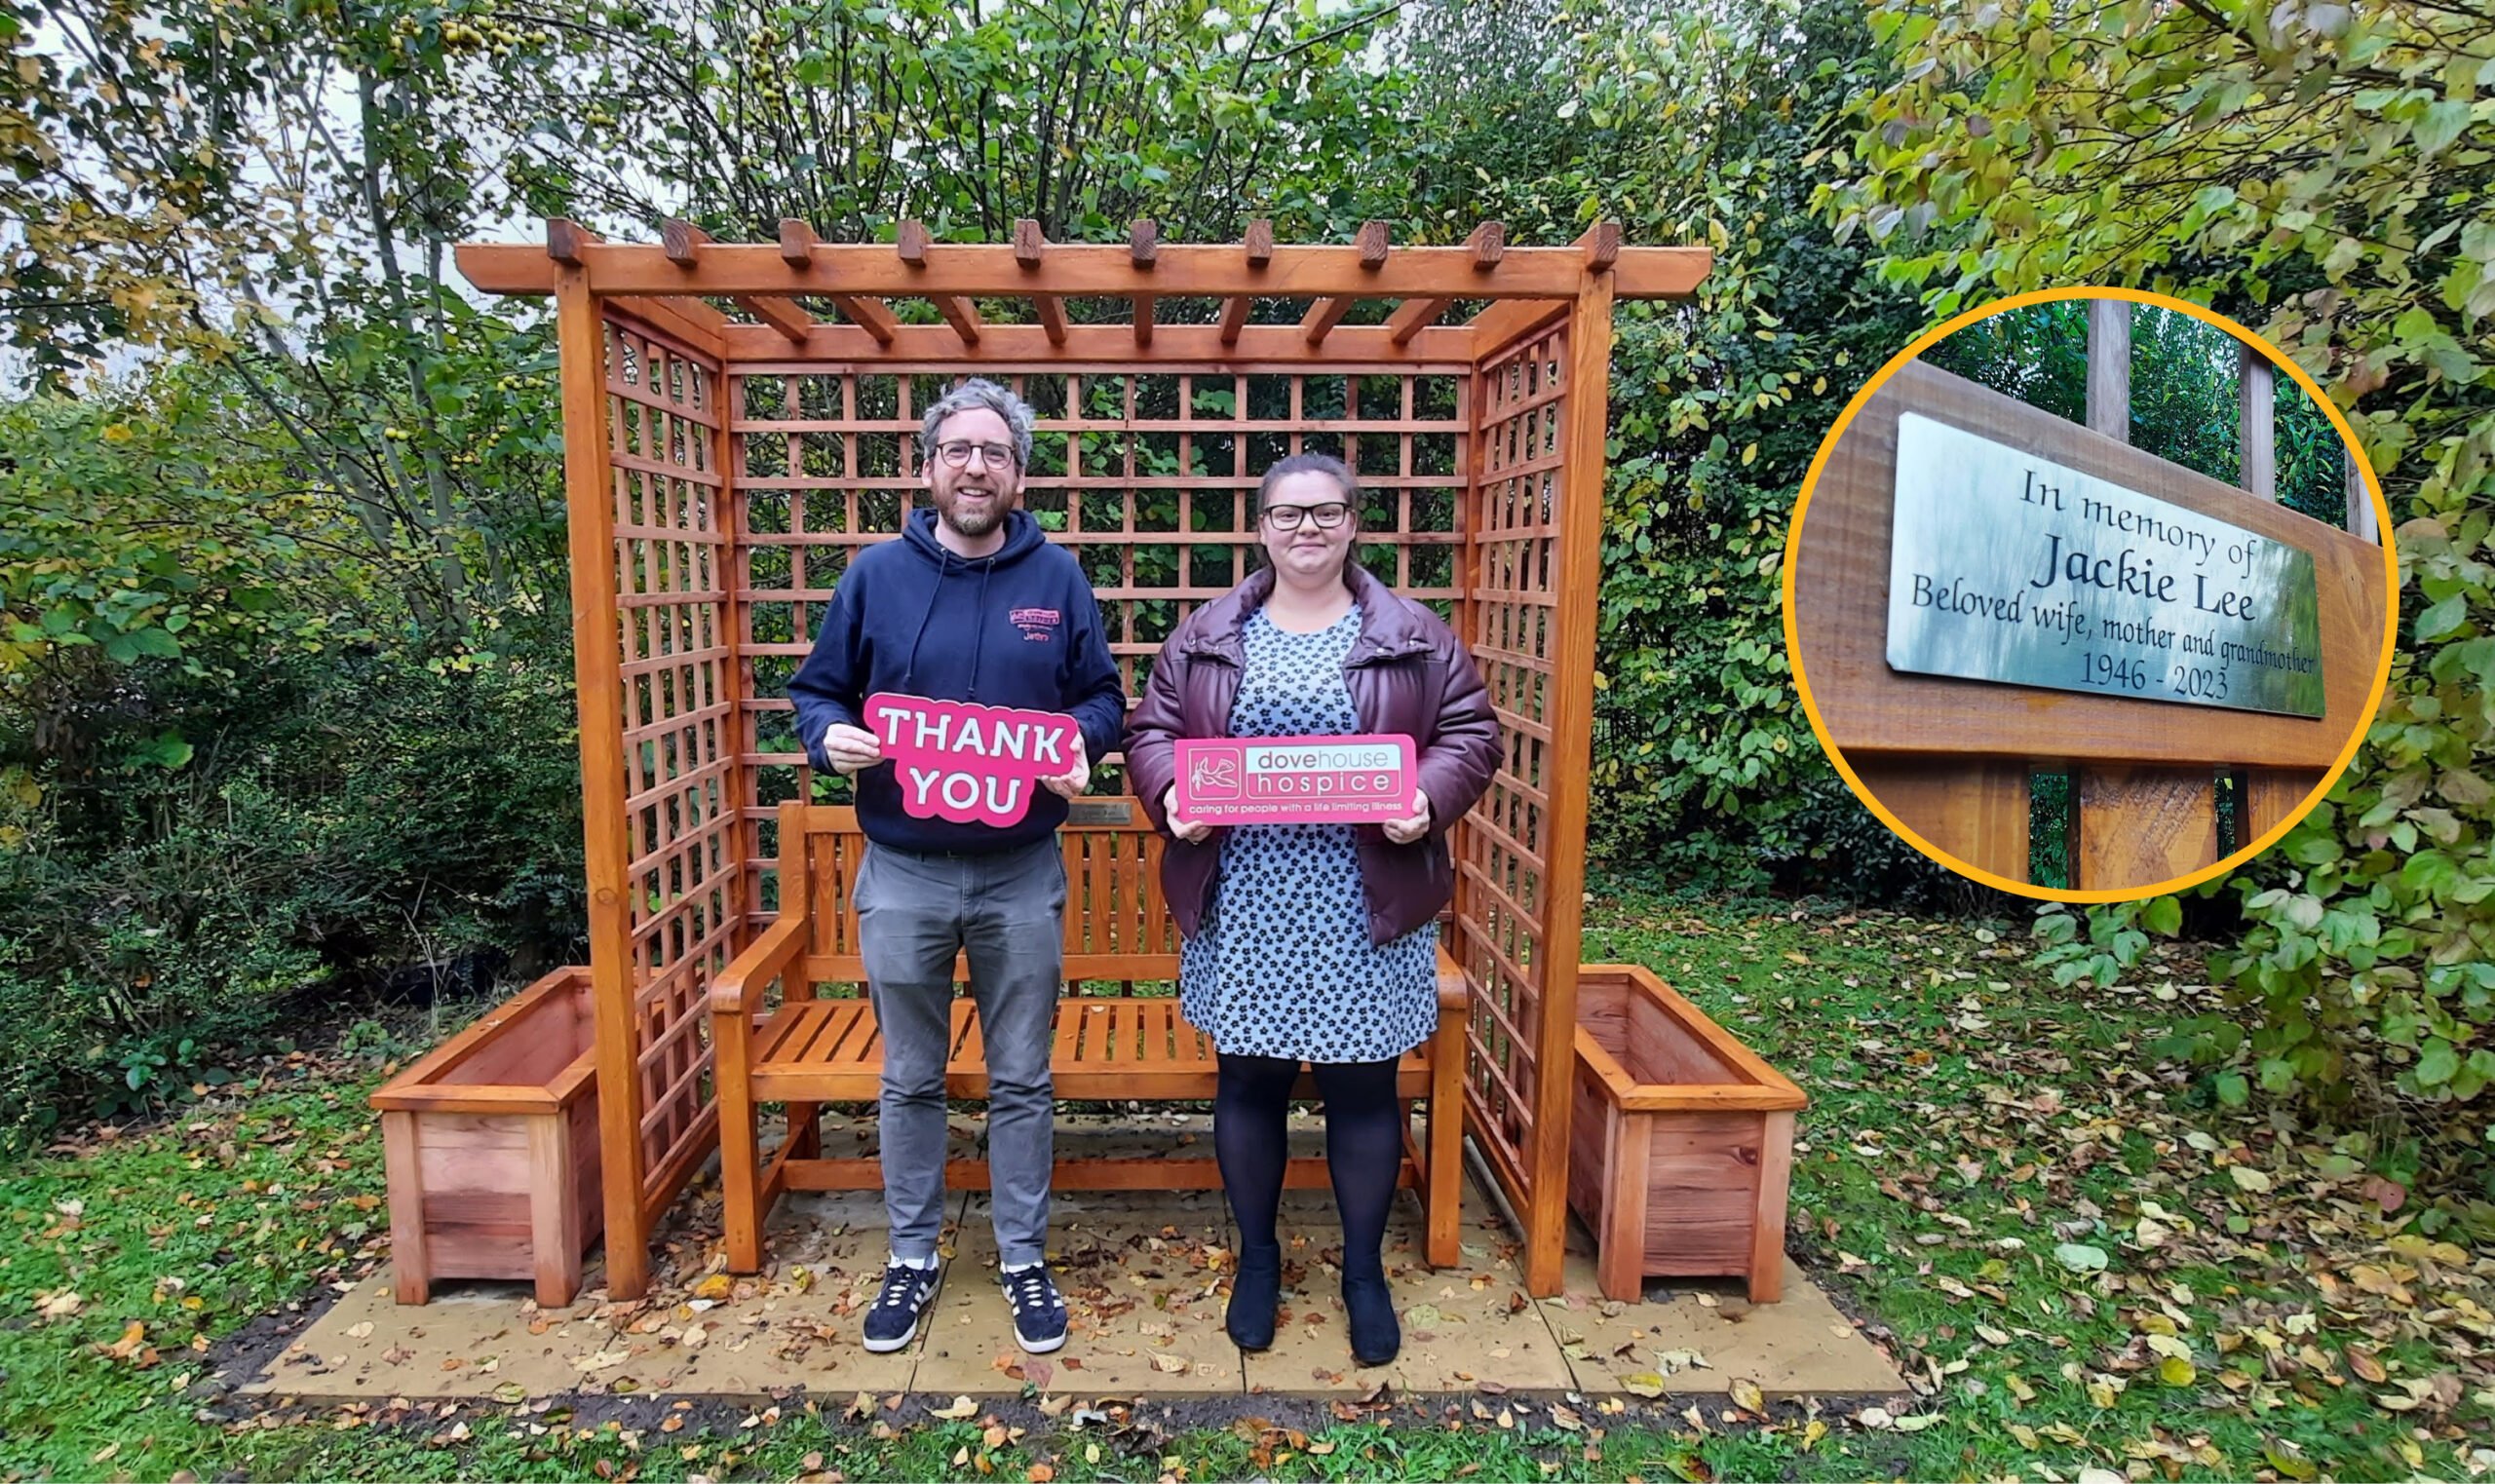 Community Impact: Two people stand in front of a newly built patio area of a garden with bench, arbour and planters. They hold a board that says thank you. A close up of the plague on the bench reads "In memory of Jackie Lee"